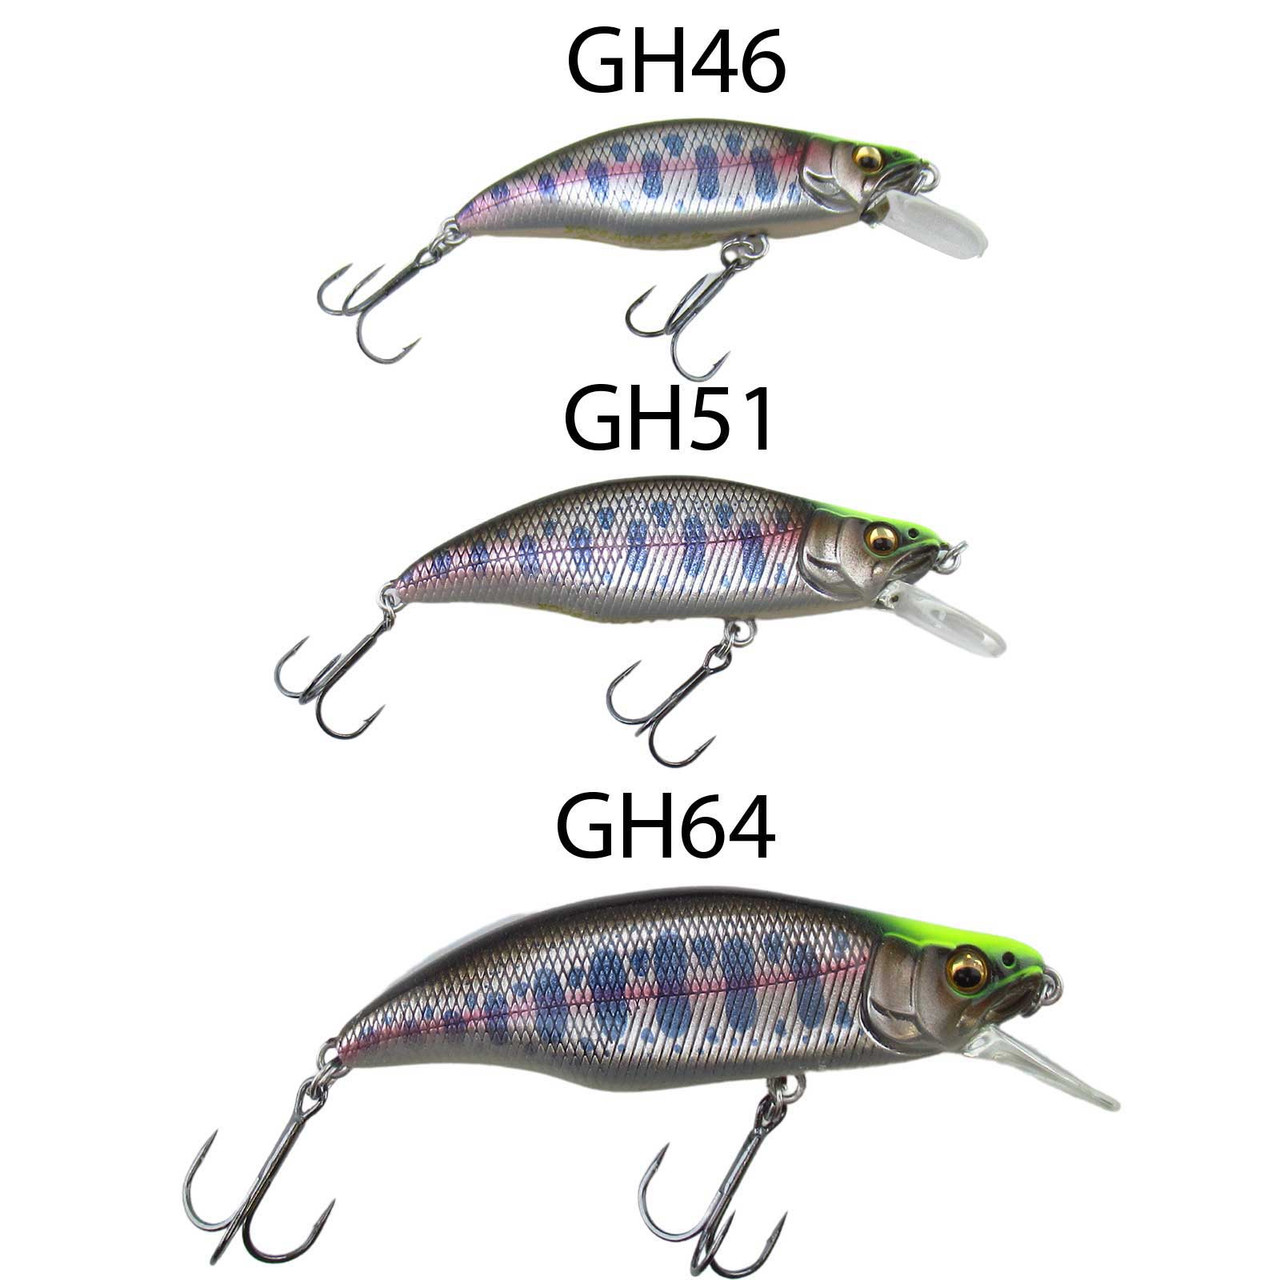 Trout Lures Megabass Great Hunting GH46 Humpback